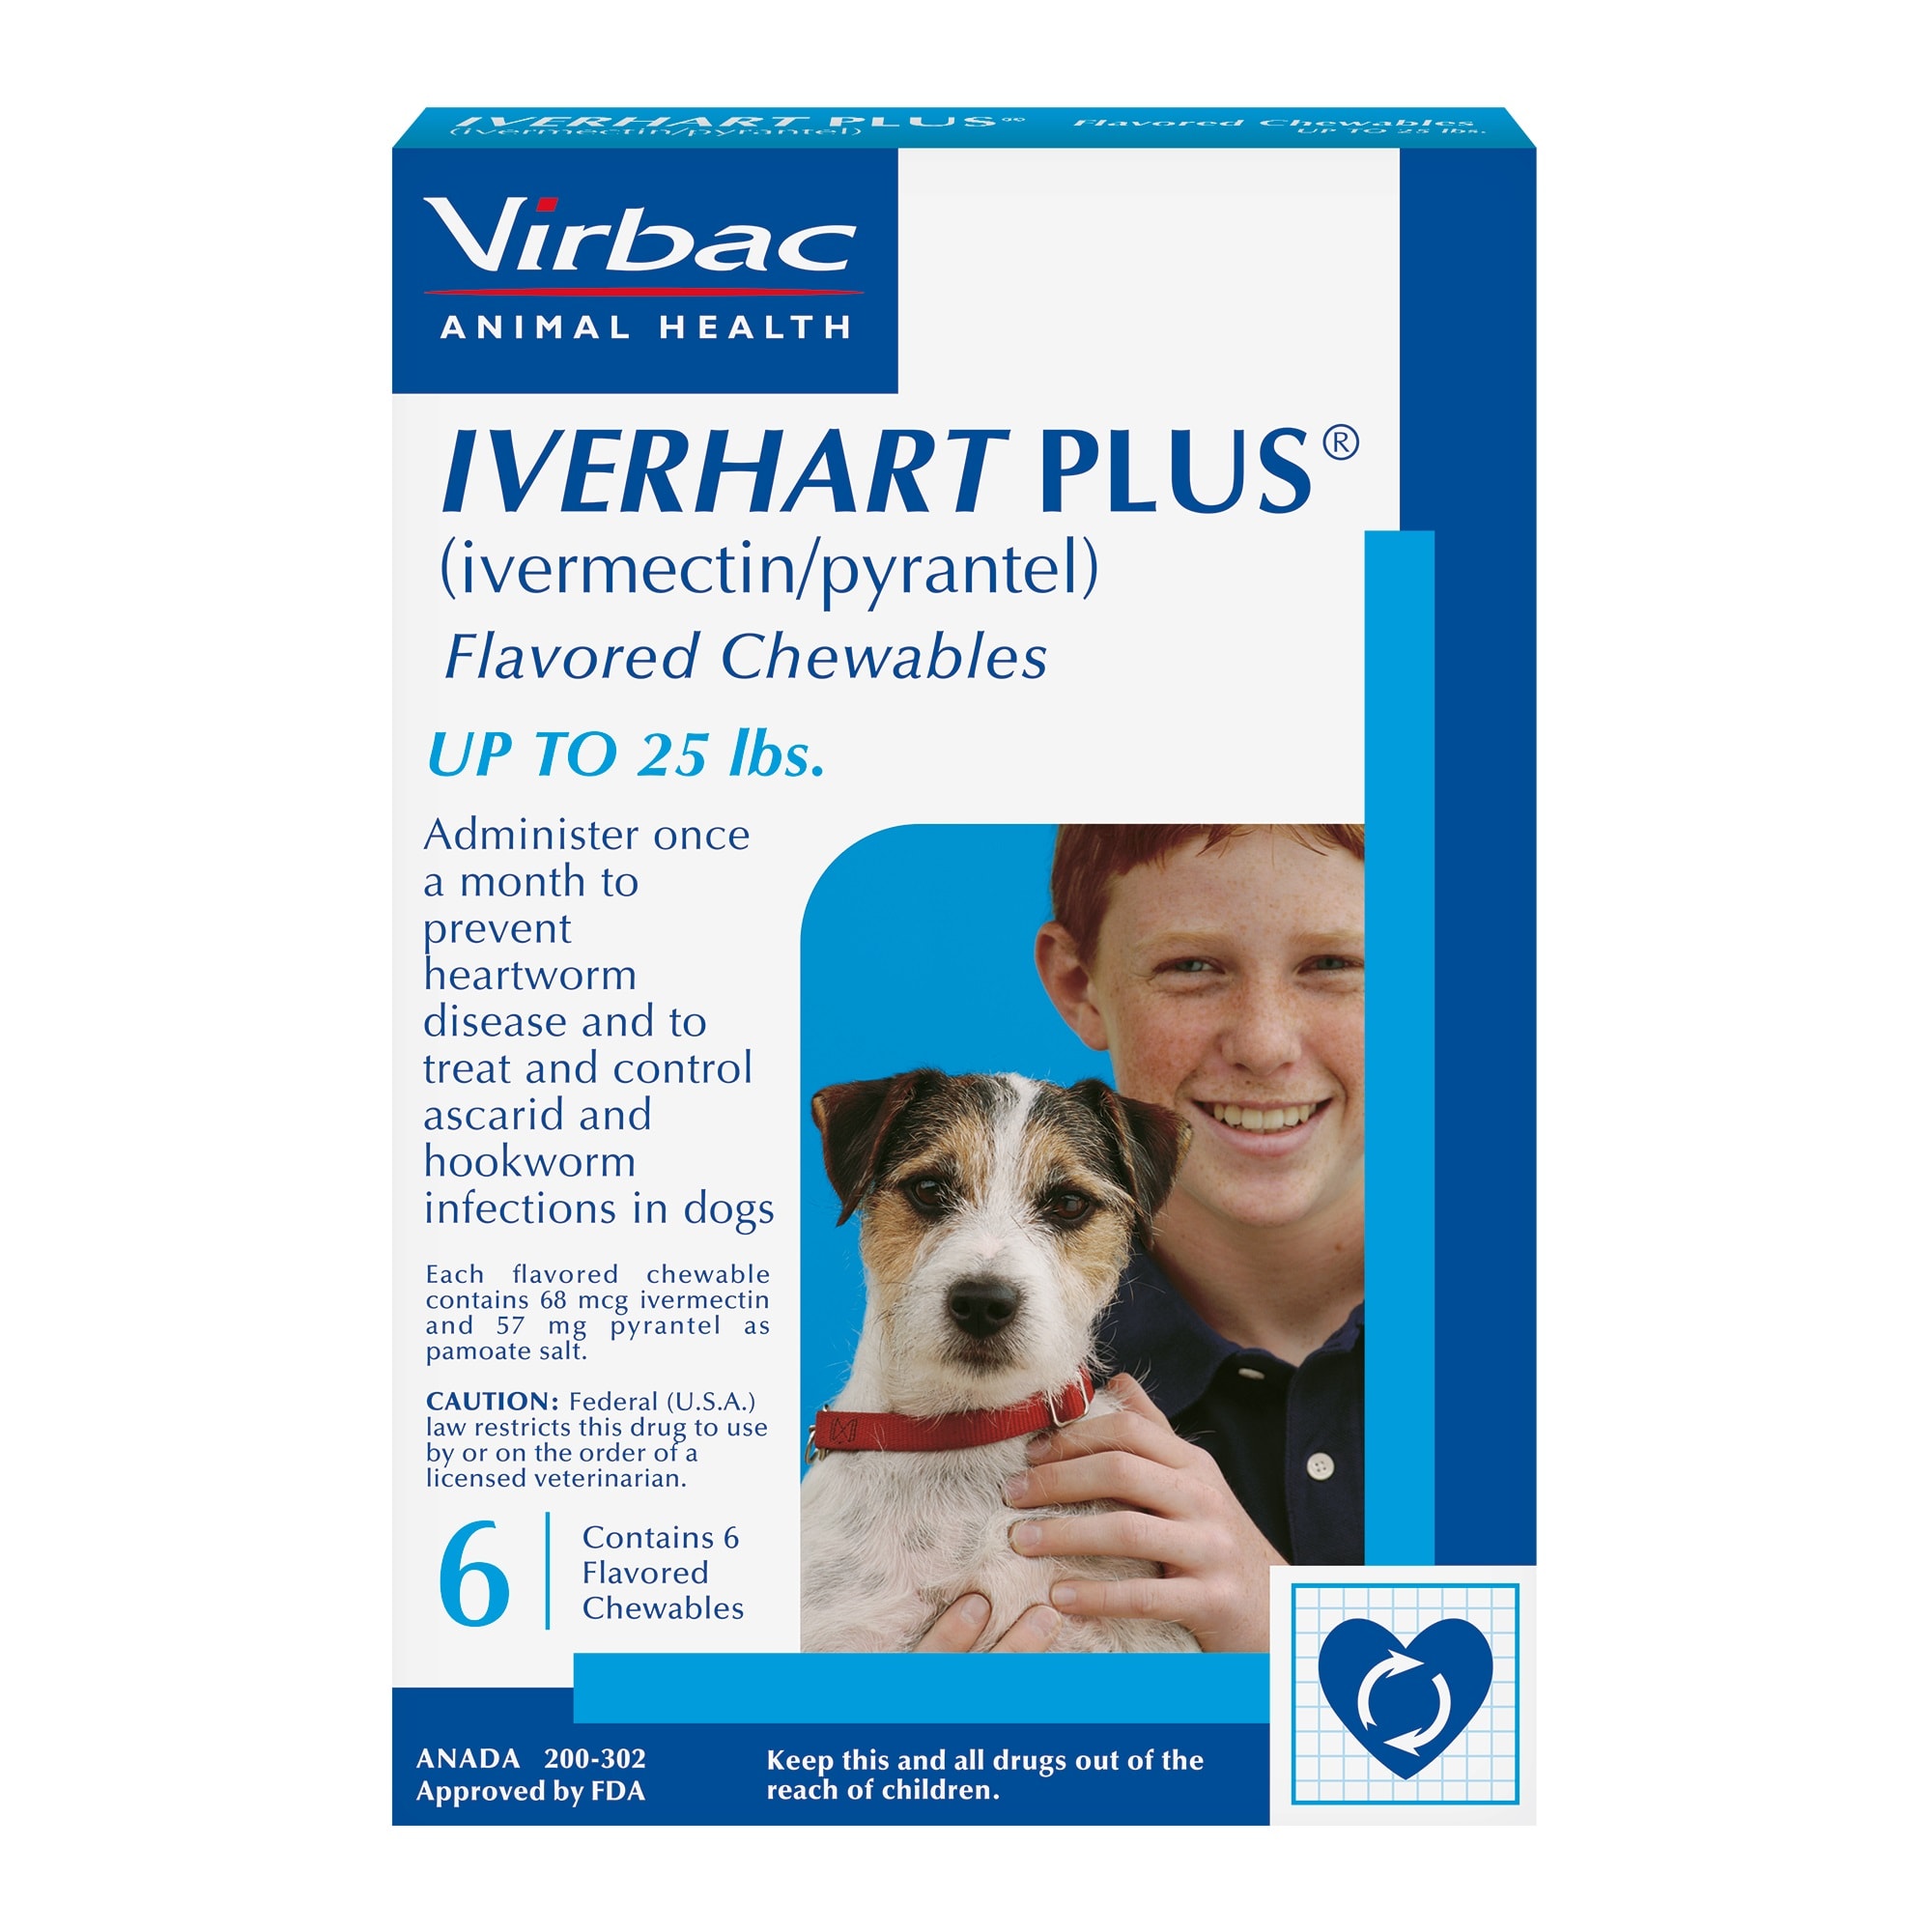 Iverhart Plus Chewable Tablets for Dogs 1 to 25 lbs.